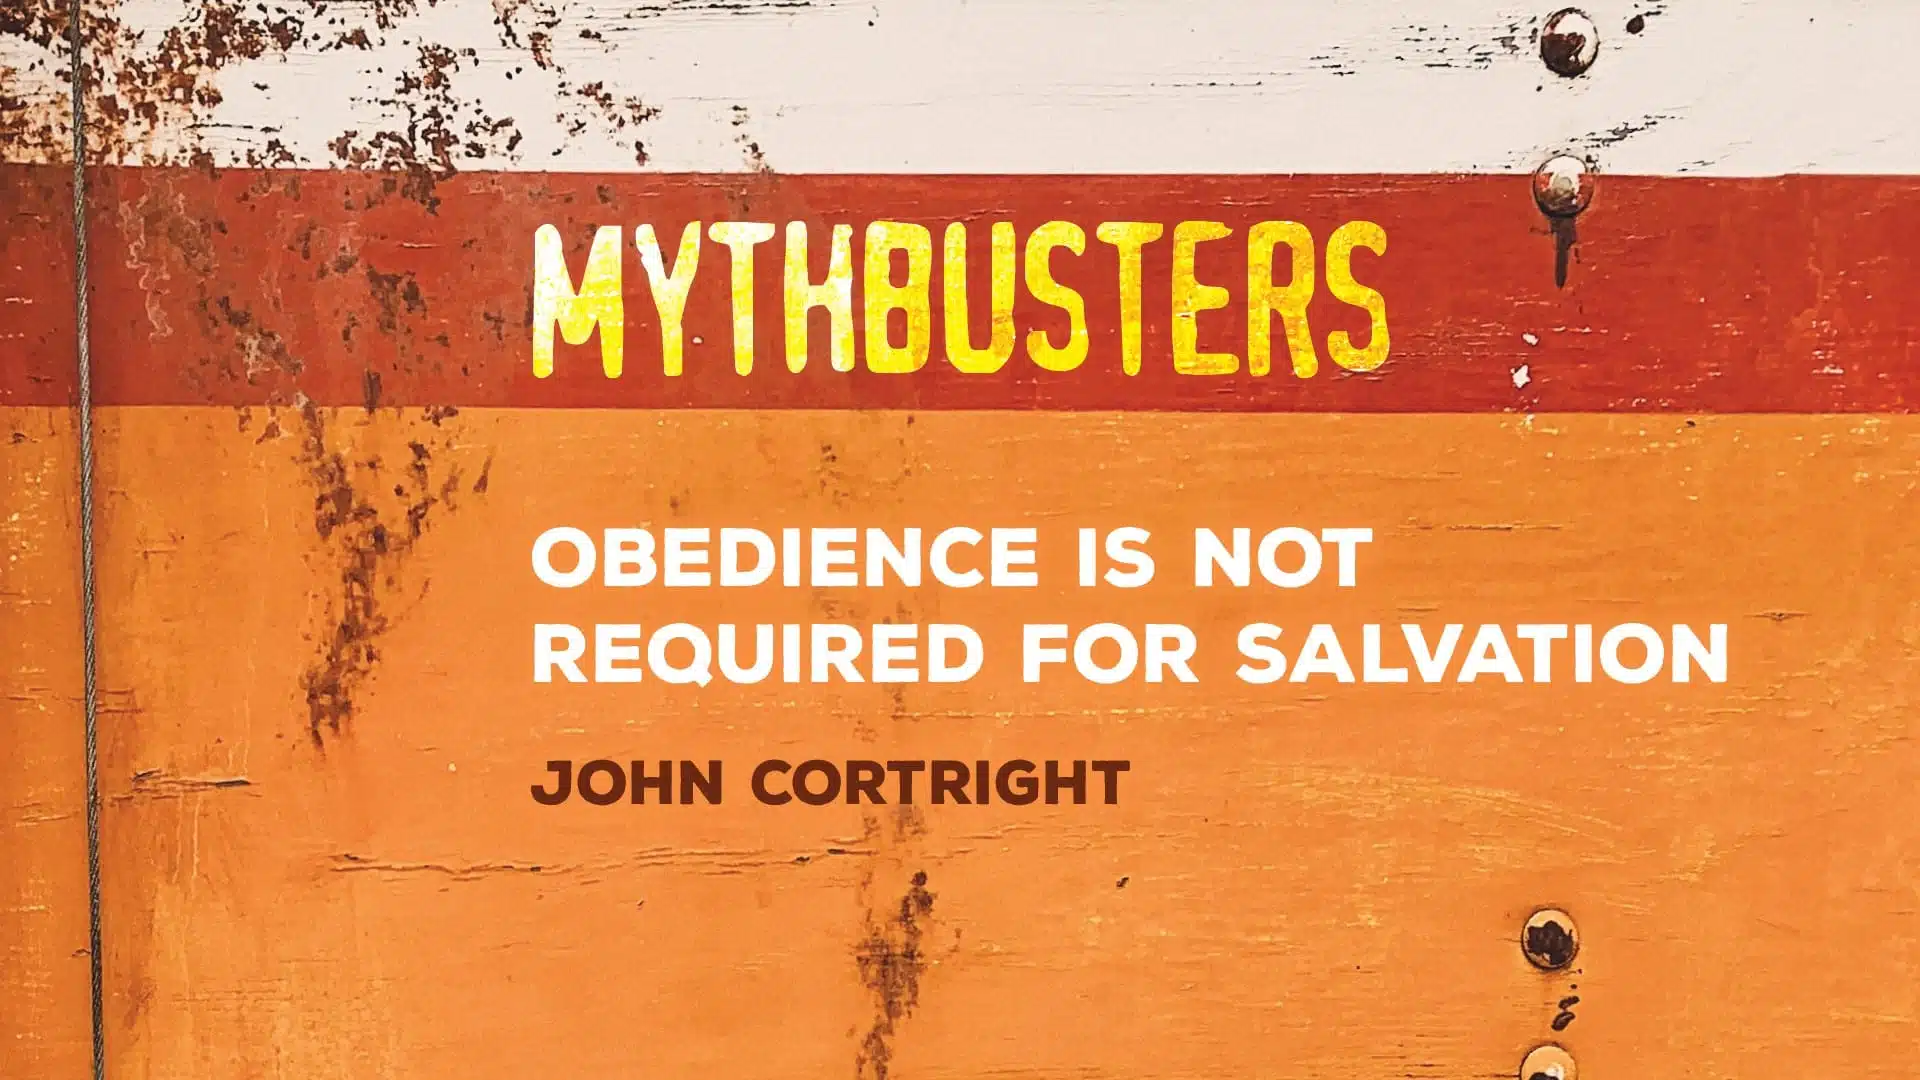 Myth: Obedience is Not Required for Salvation